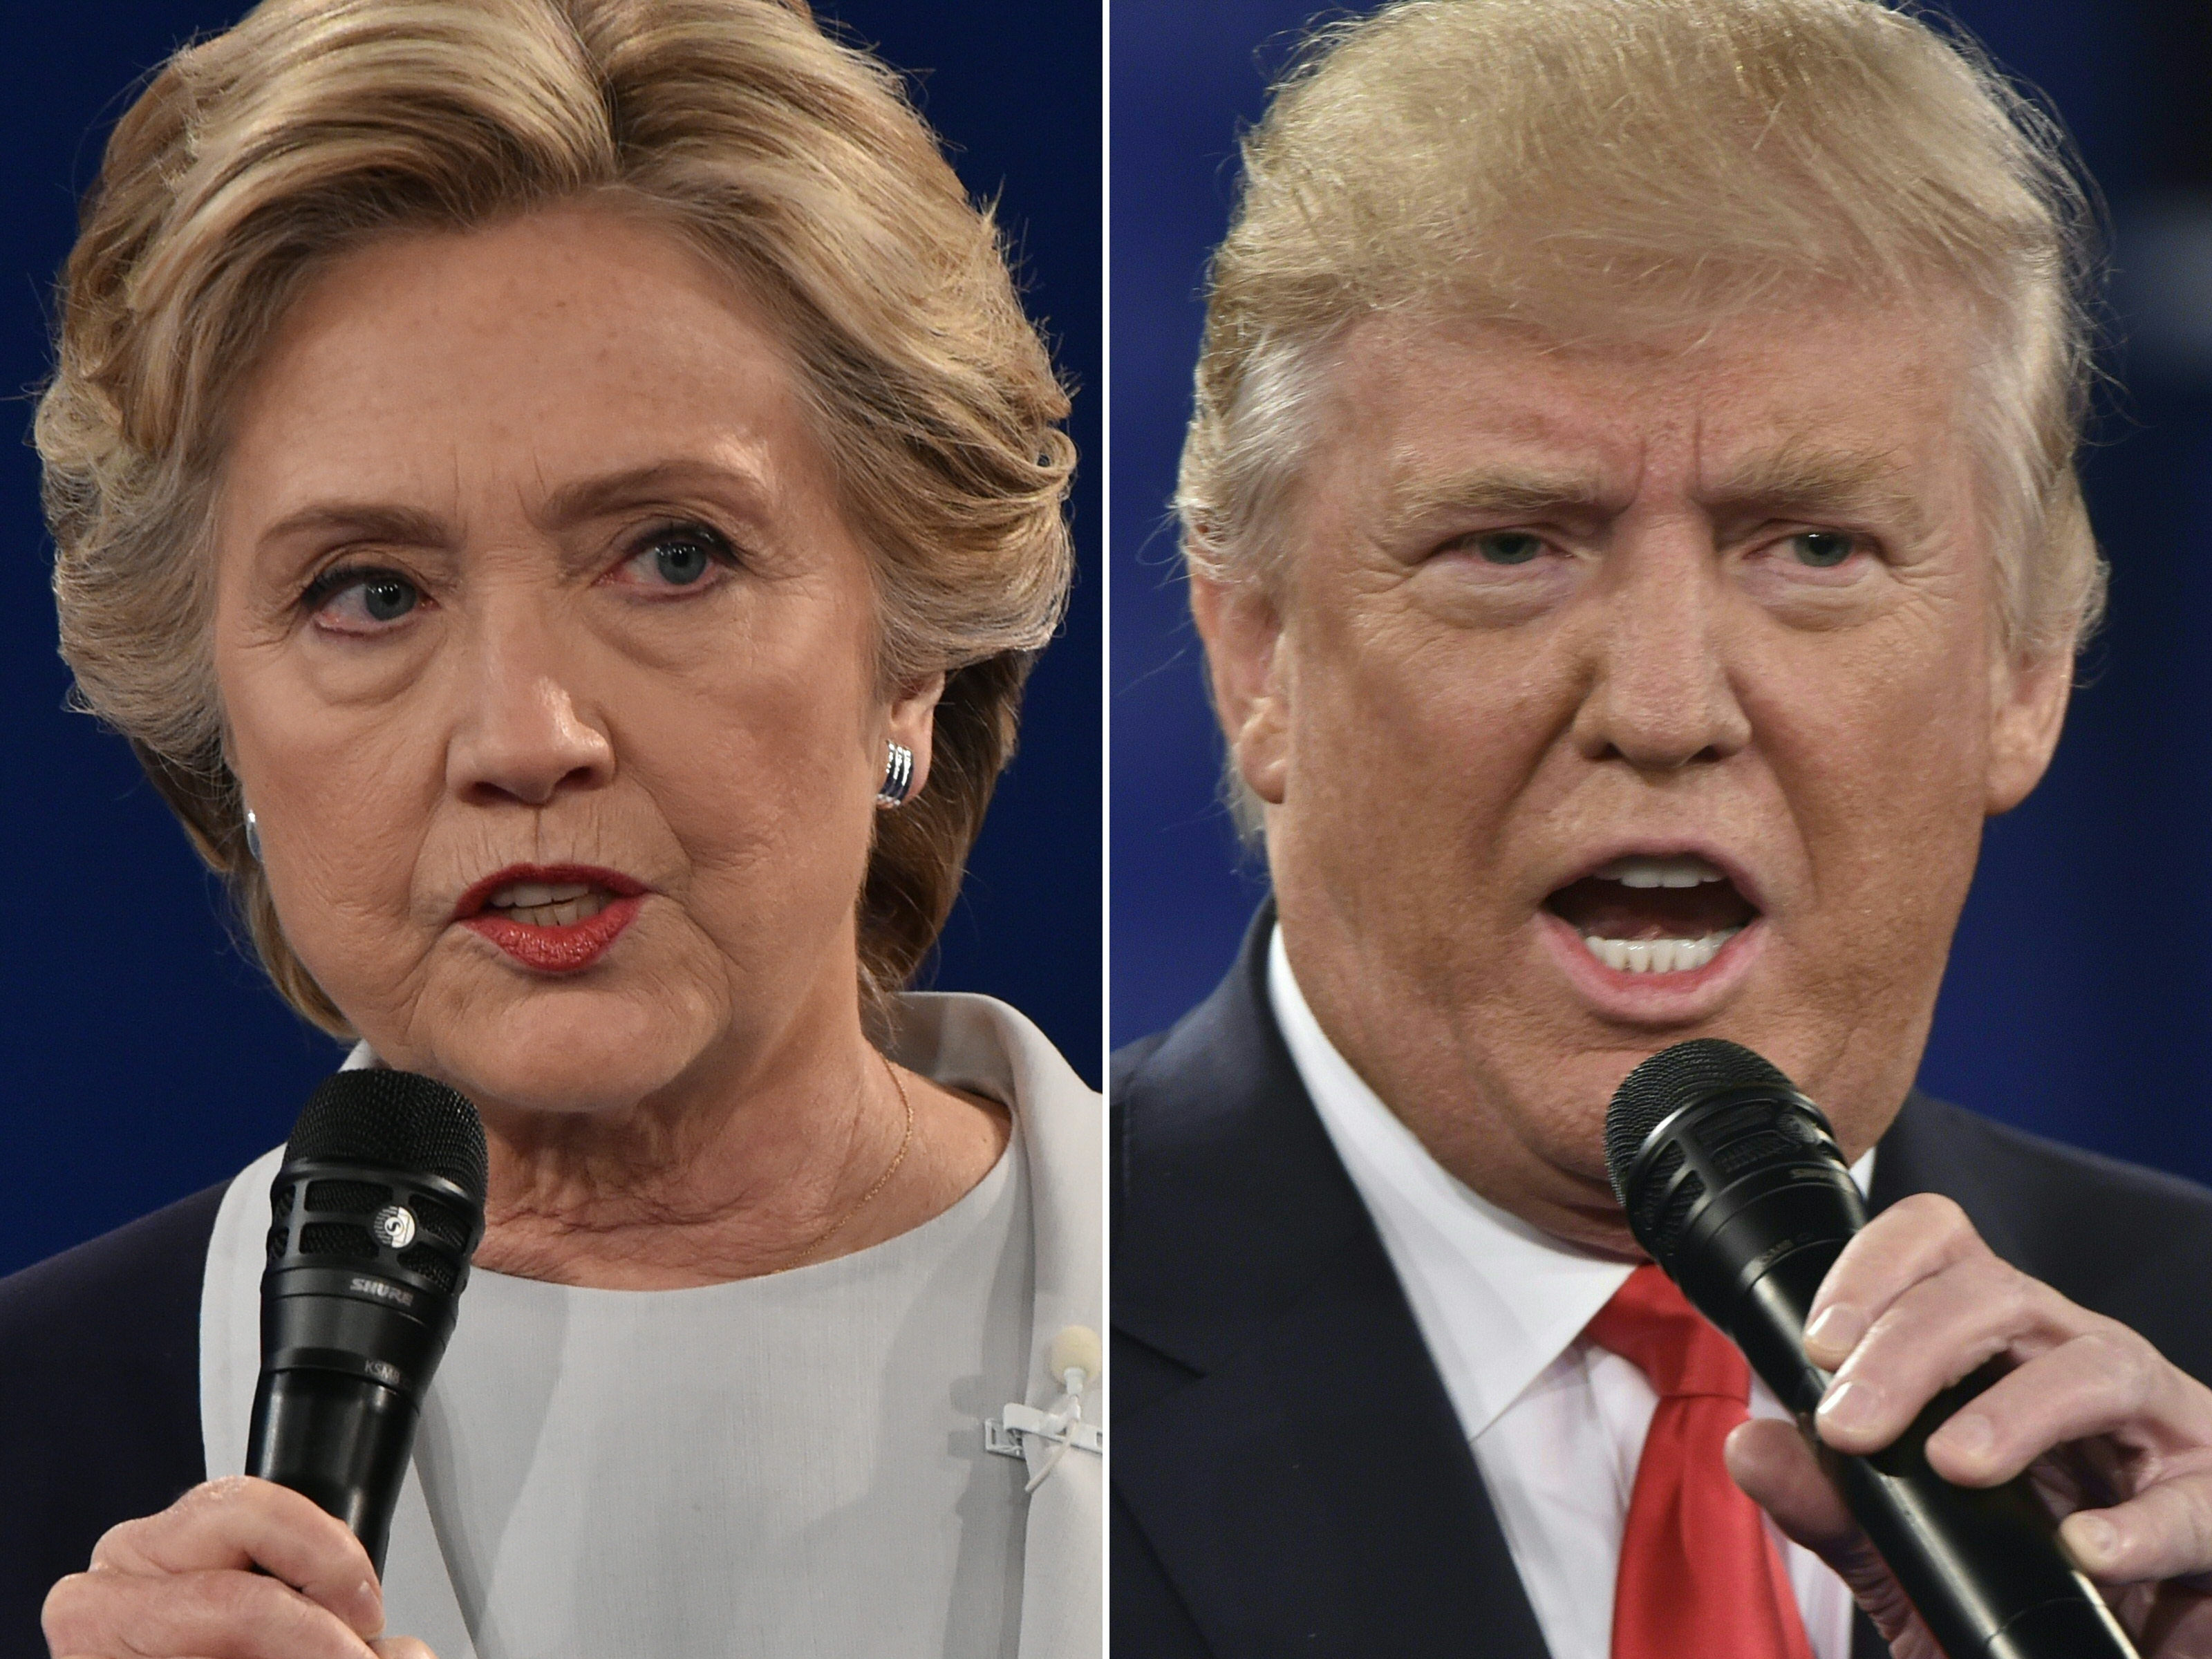 (COMBO) This combination of pictures created on October 09, 2016 shows Democratic presidential candidate Hillary Clinton and Republican presidential candidate Donald Trump during the second presidential debate at Washington University in St. Louis, Missouri on October 9, 2016.  / AFP PHOTO / Paul J. Richards